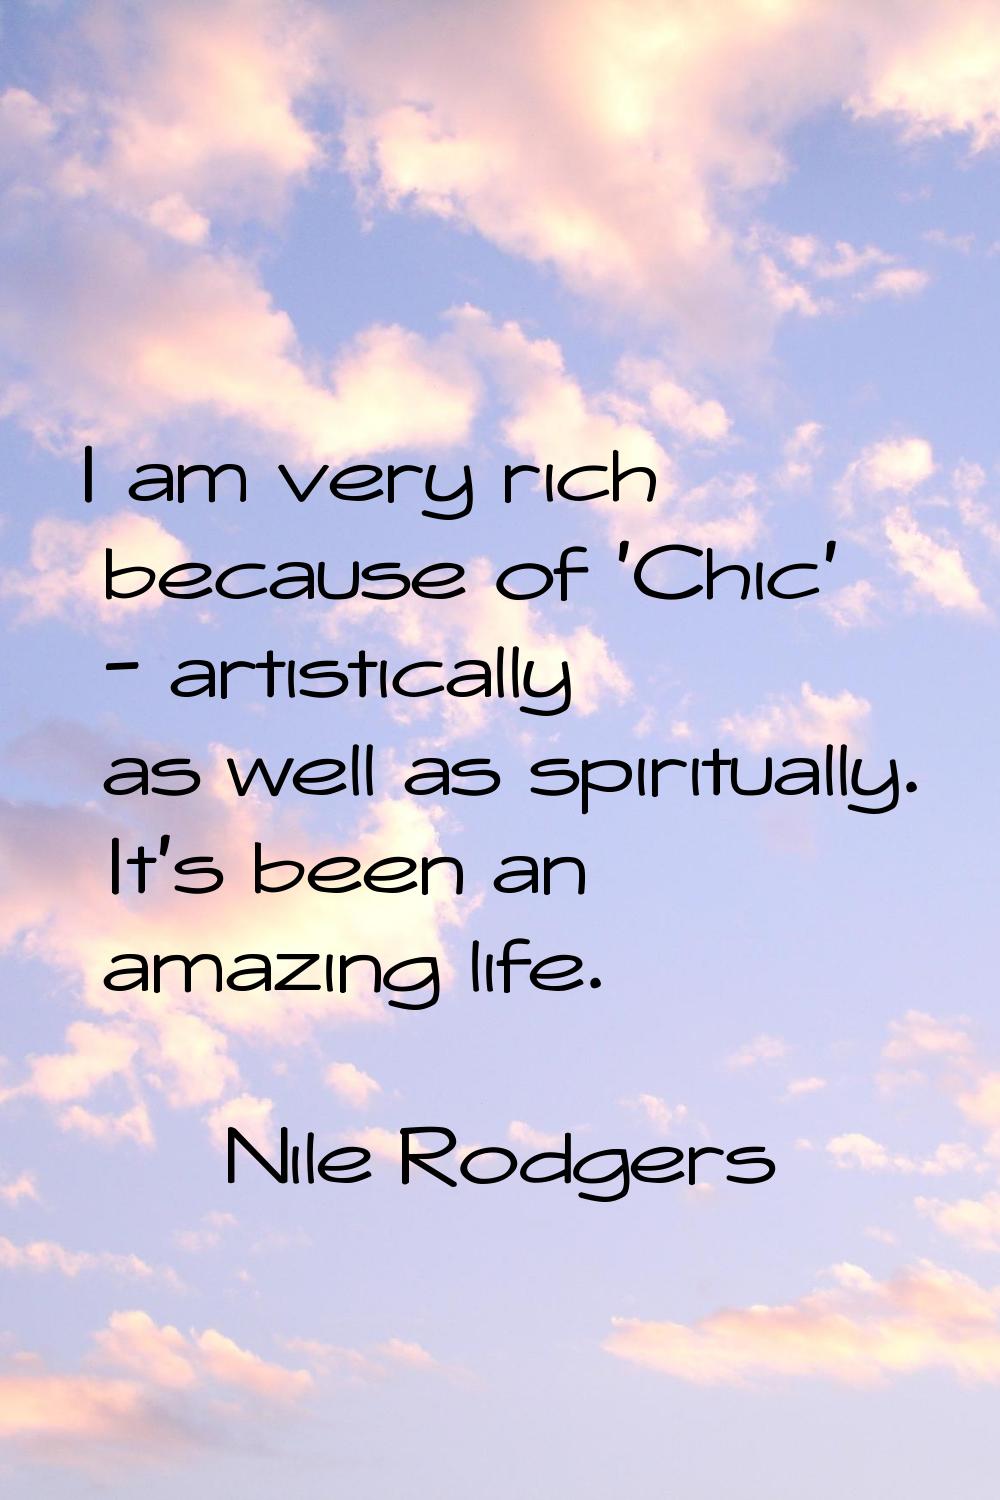 I am very rich because of 'Chic' - artistically as well as spiritually. It's been an amazing life.